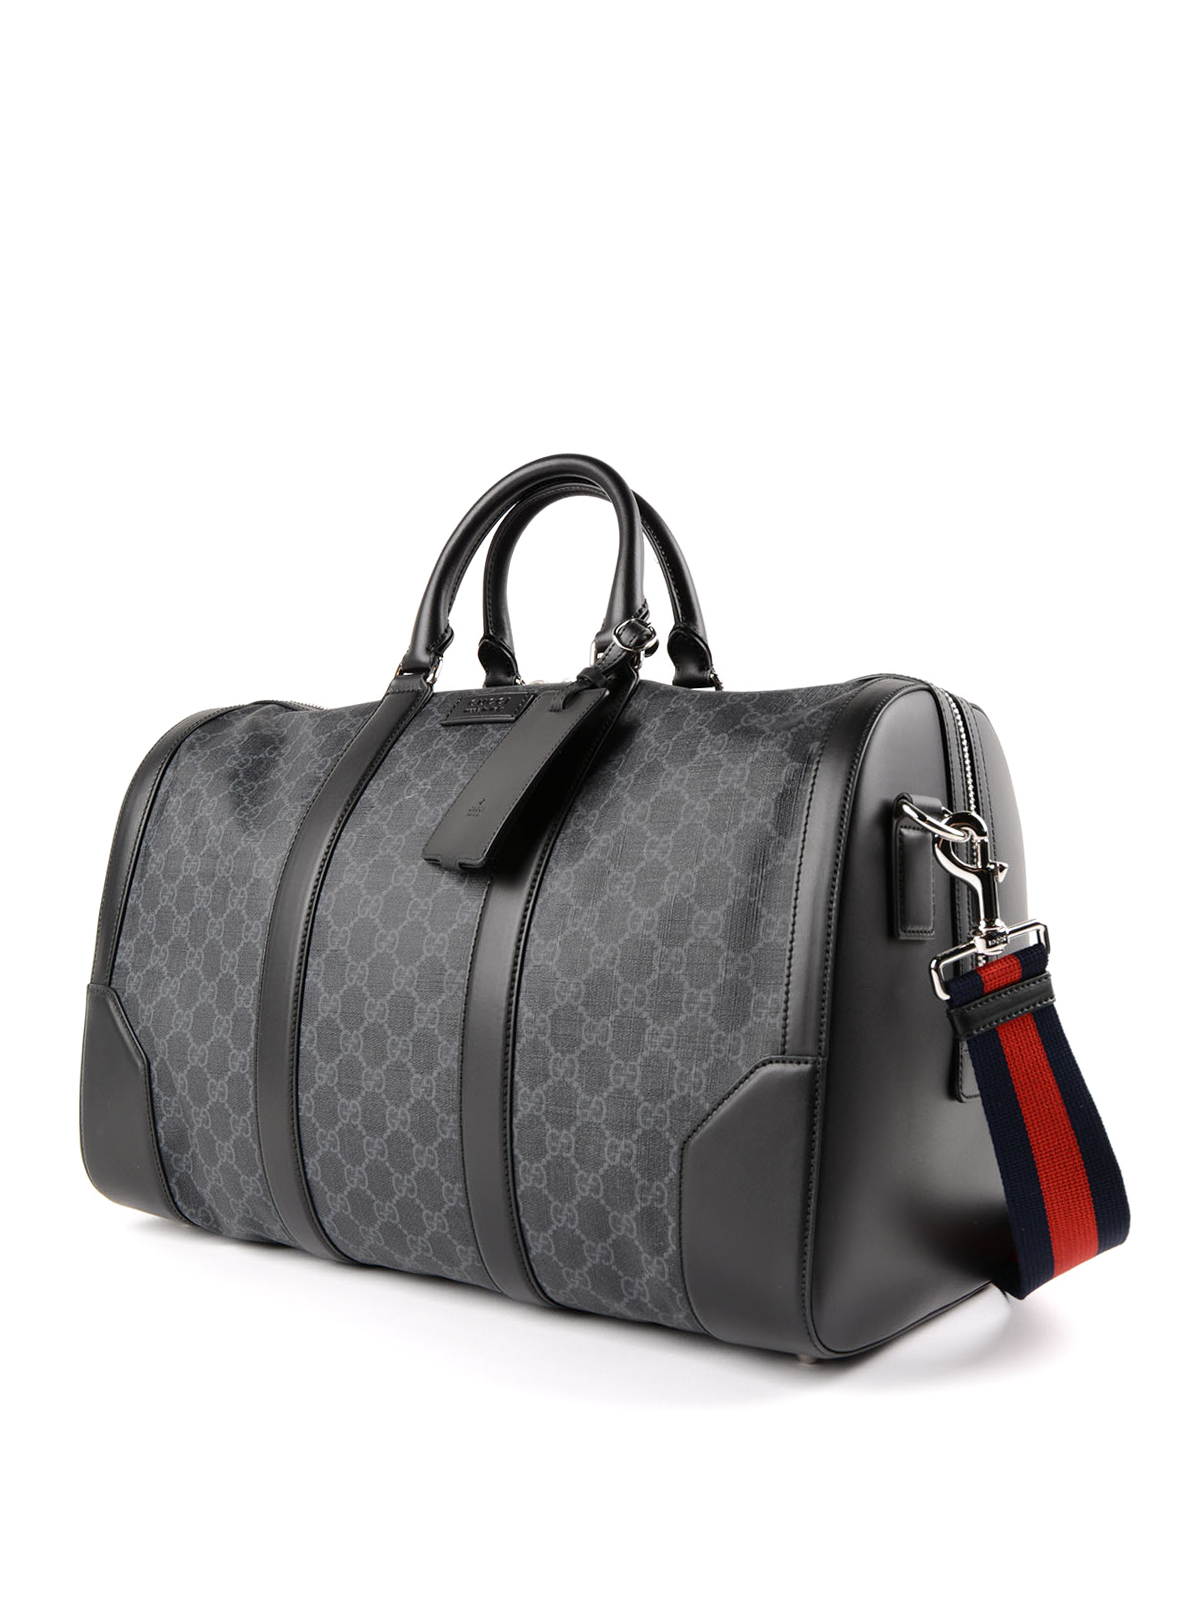 Gucci Duffle Bag, For Travel